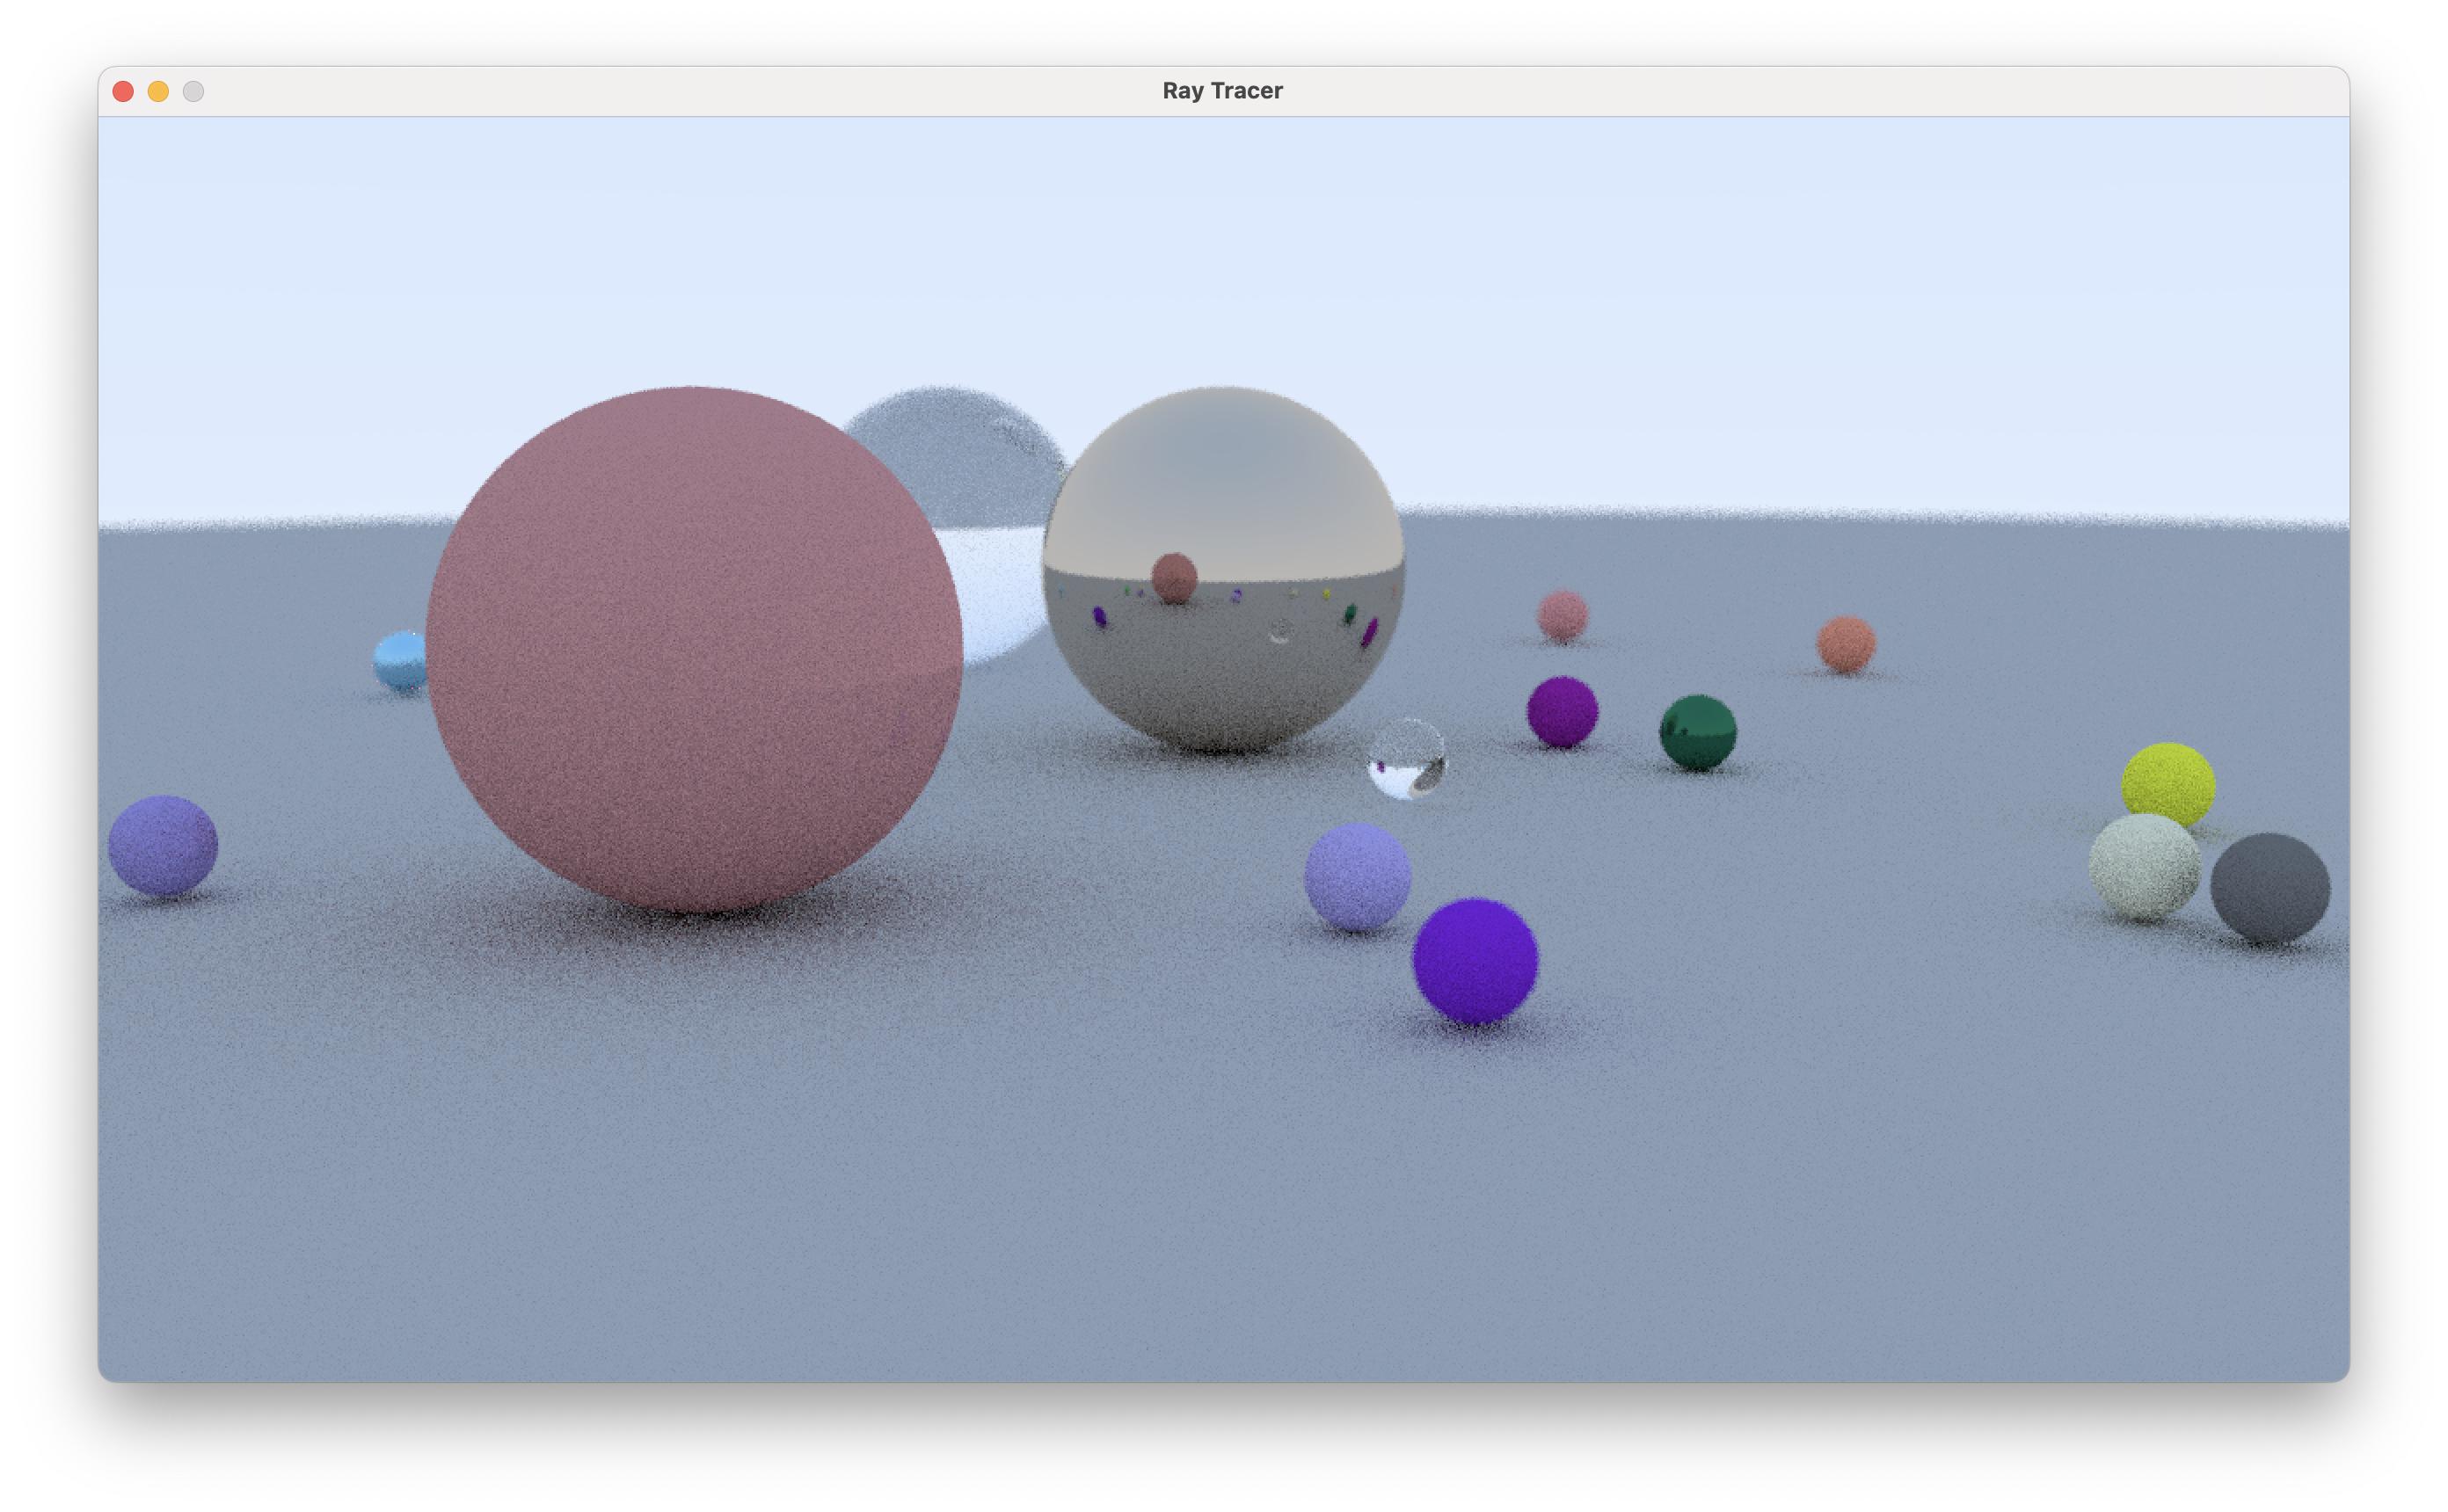 real-time ray tracing